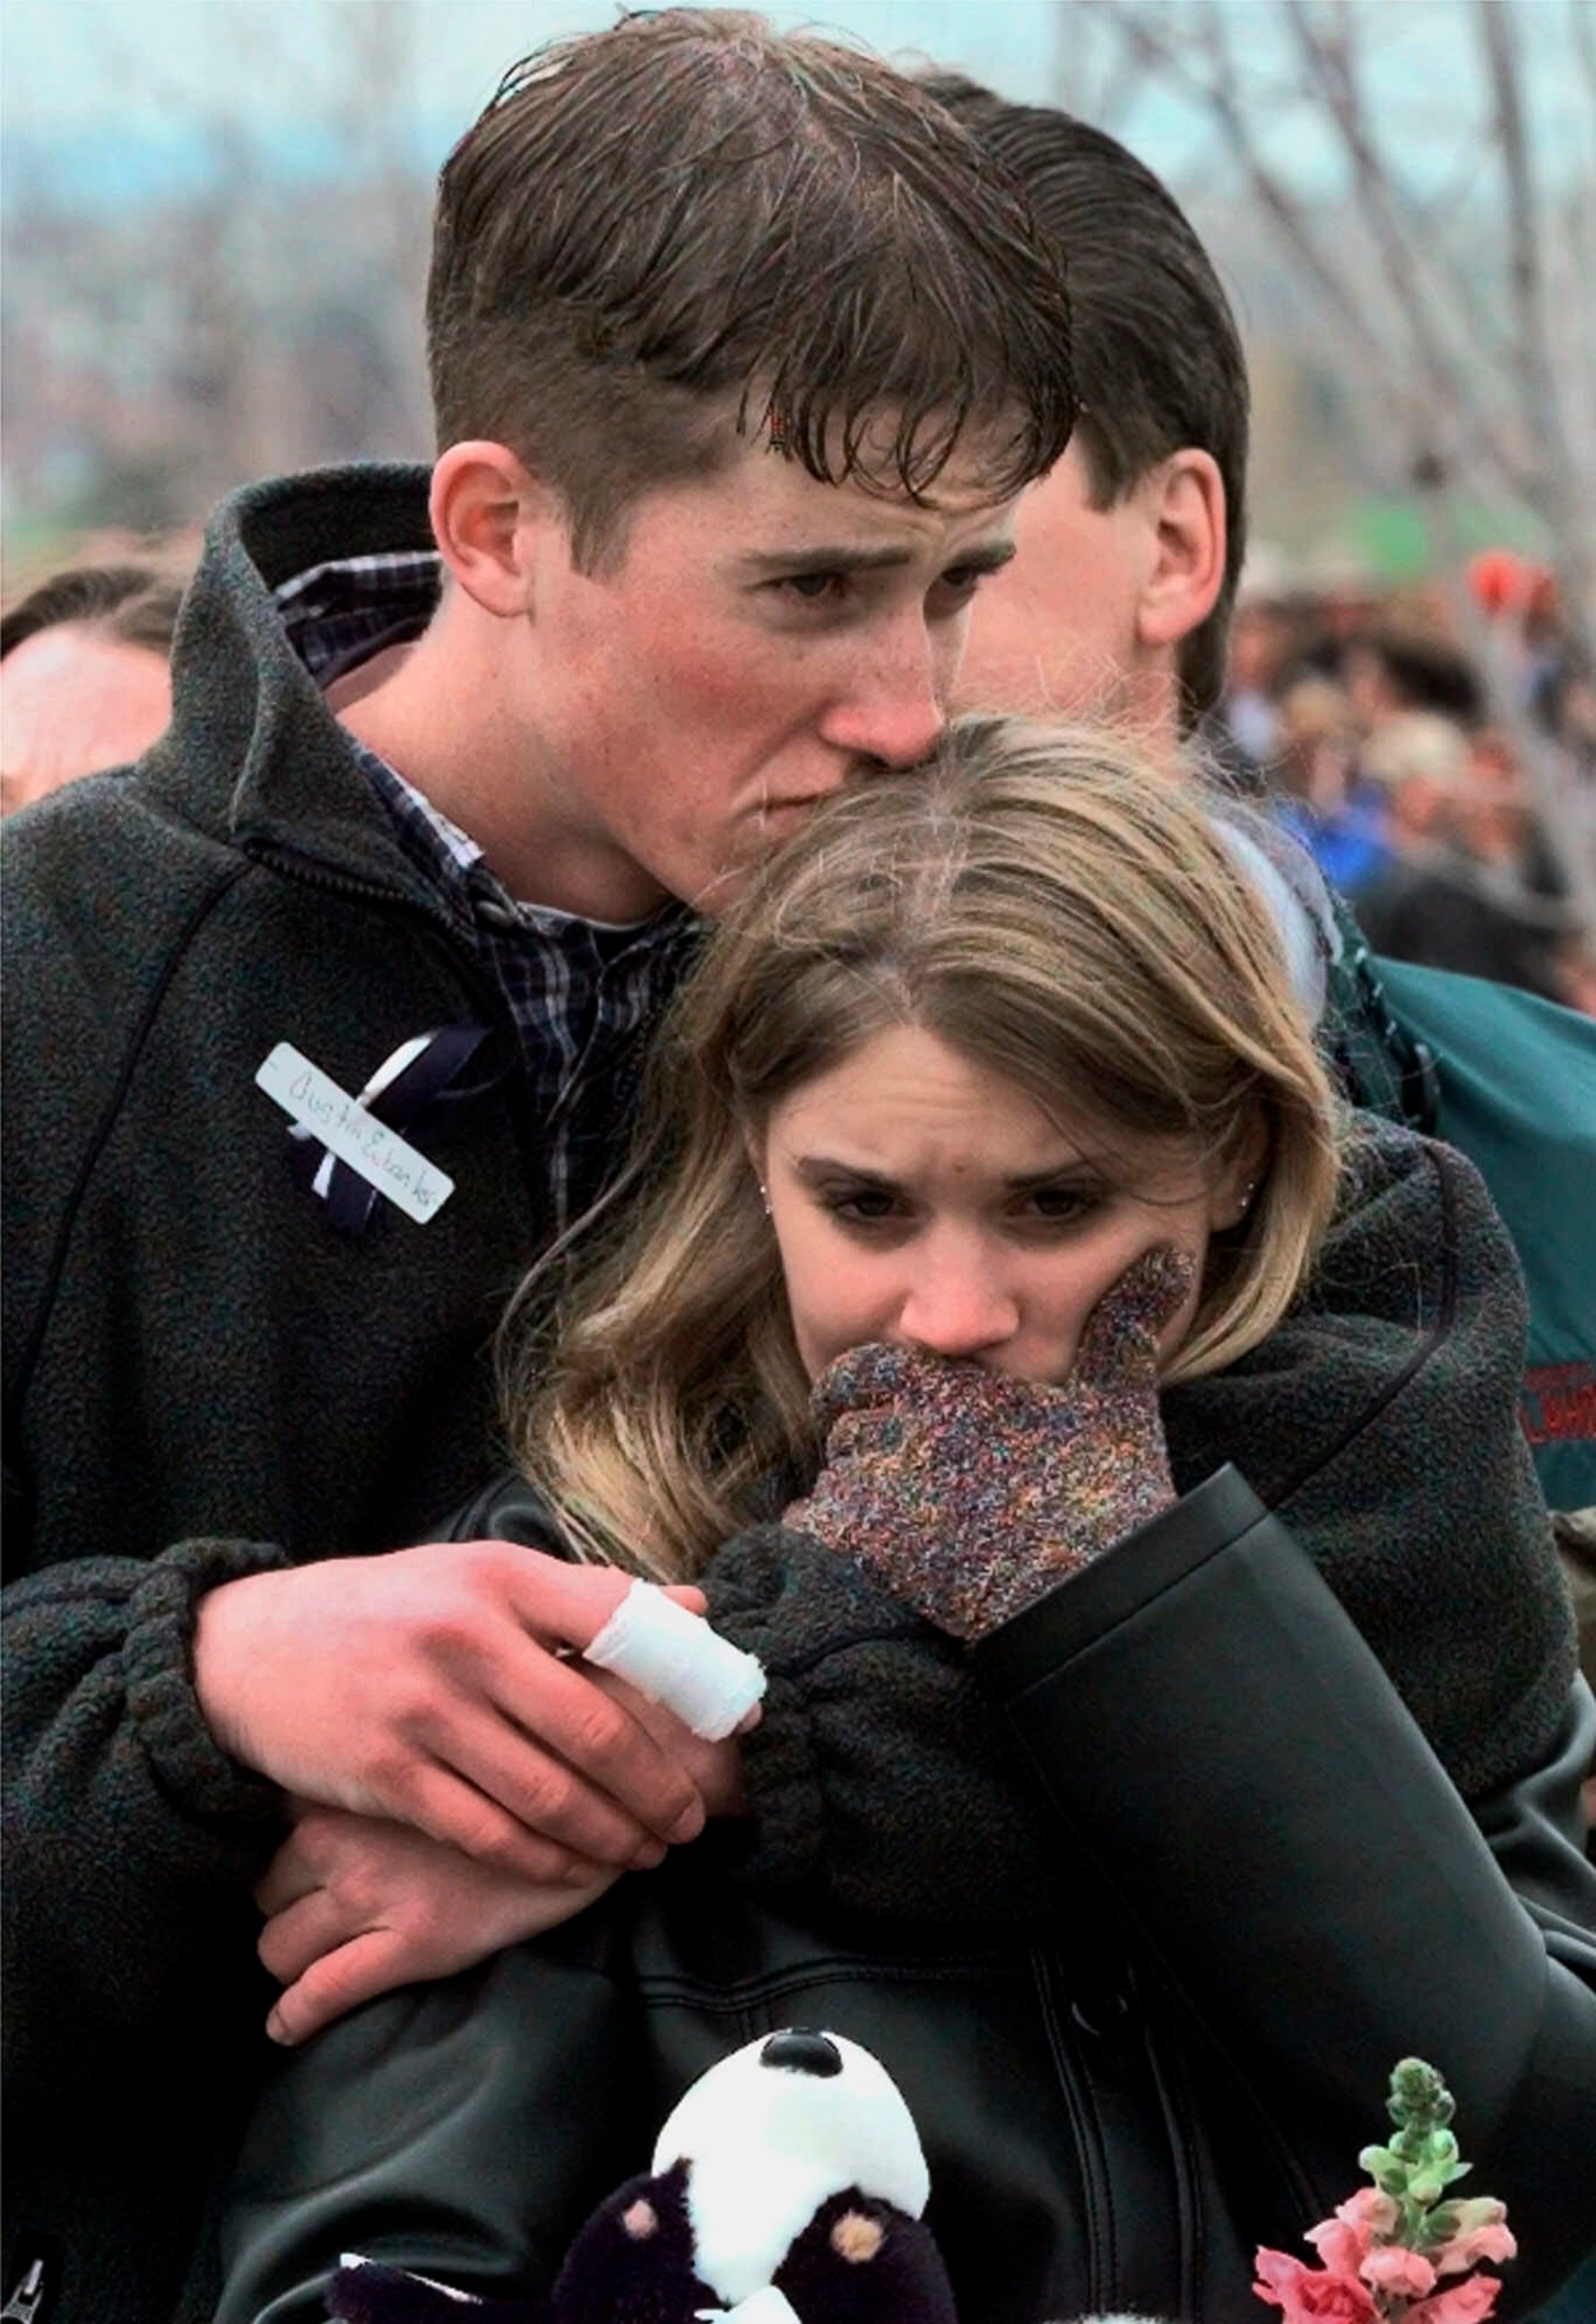 PHOTO: In this April 25, 1999 file photo, shooting victim Austin Eubanks hugs his unidentified girlfriend during a community wide memorial service in Littleton, Colo., for the victims of the shooting rampage at Columbine High School the previous week.